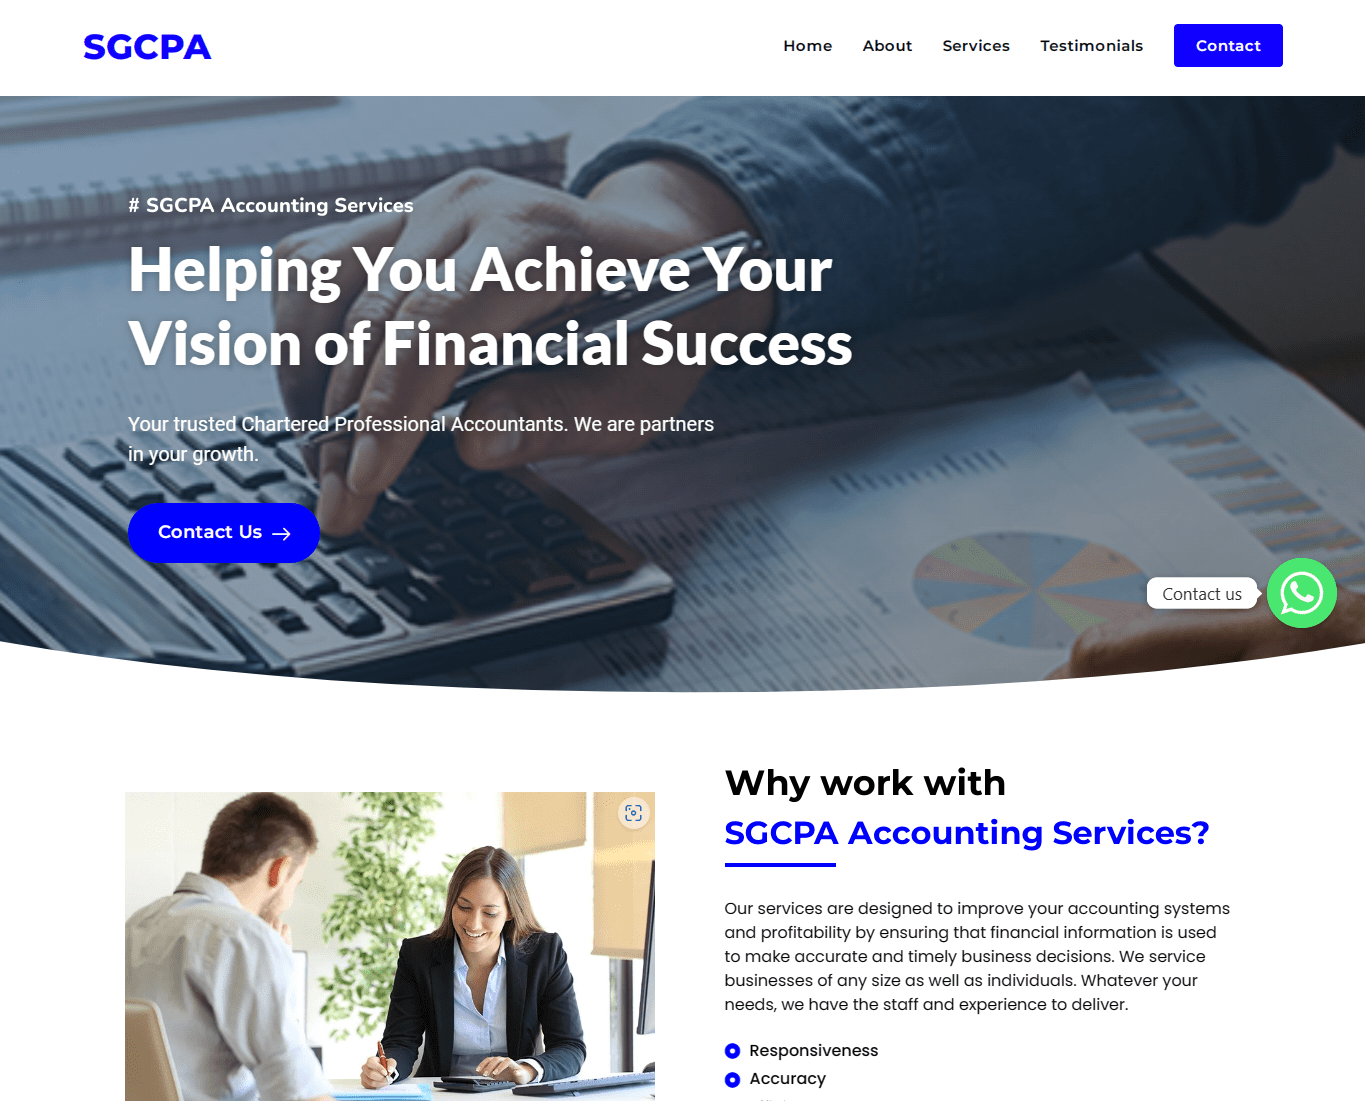 SGCPA Accounting Services